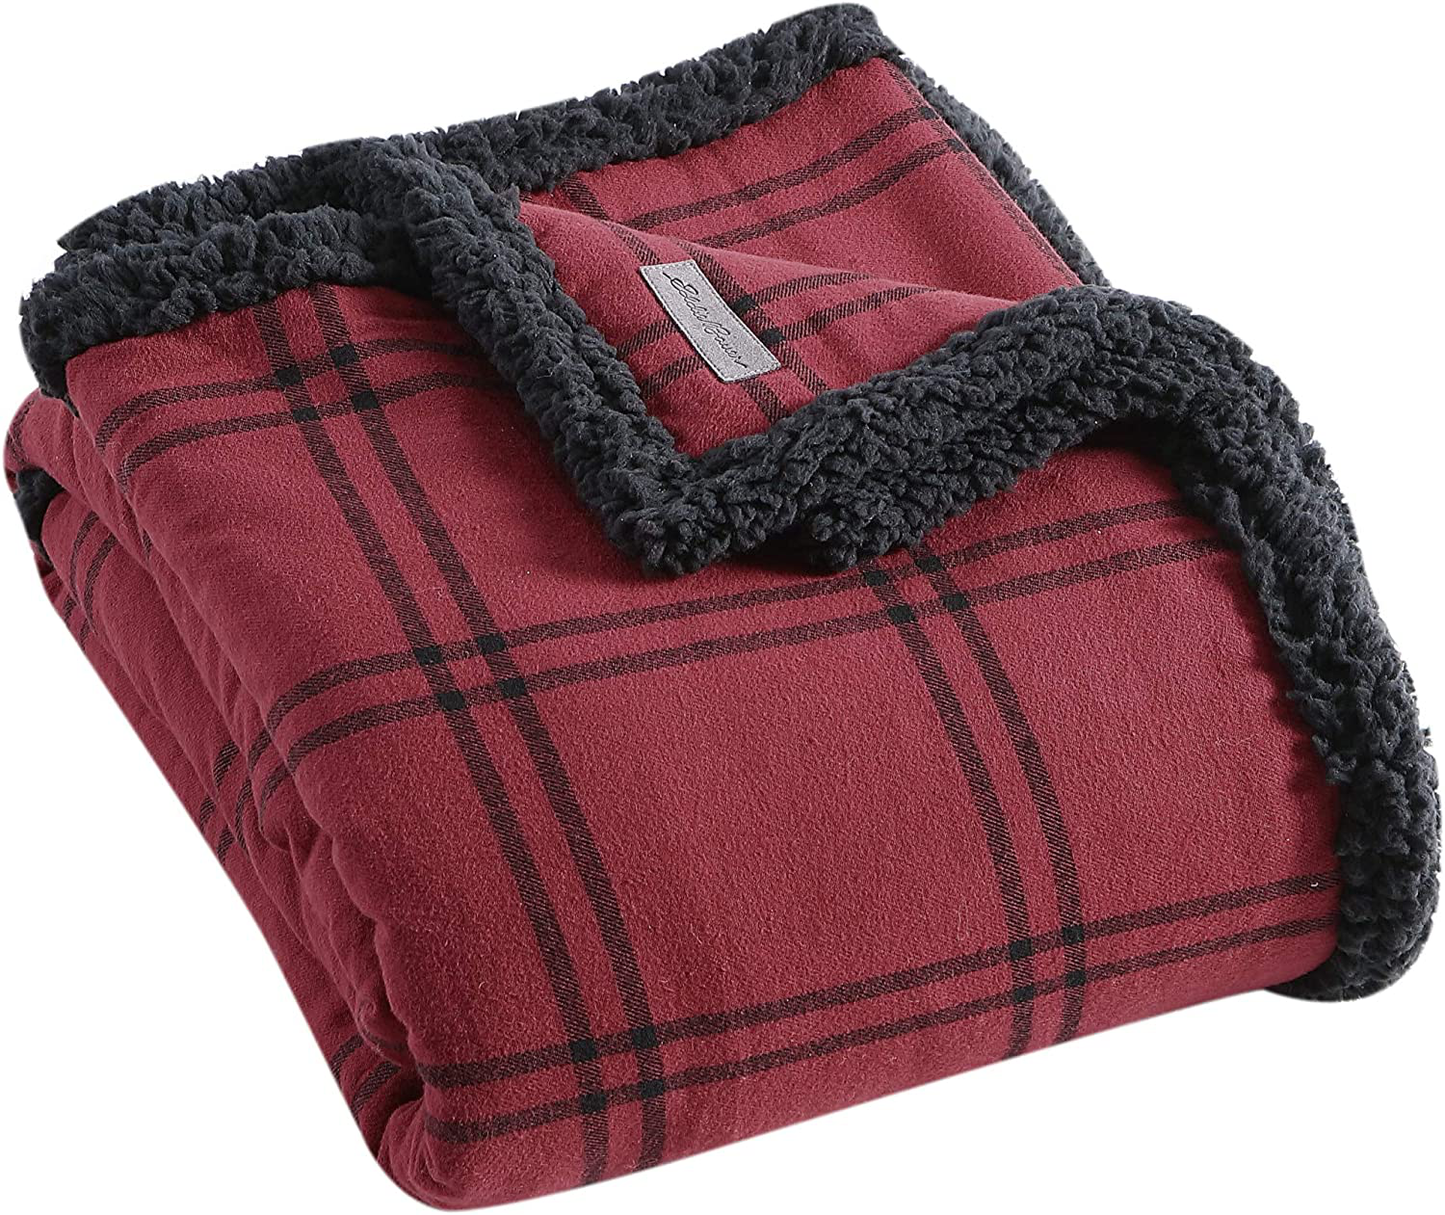 Eddie Bauer Home Plush Sherpa Fleece Throw Soft & Cozy Reversible Blanket, Ideal for Travel, Camping, & Home